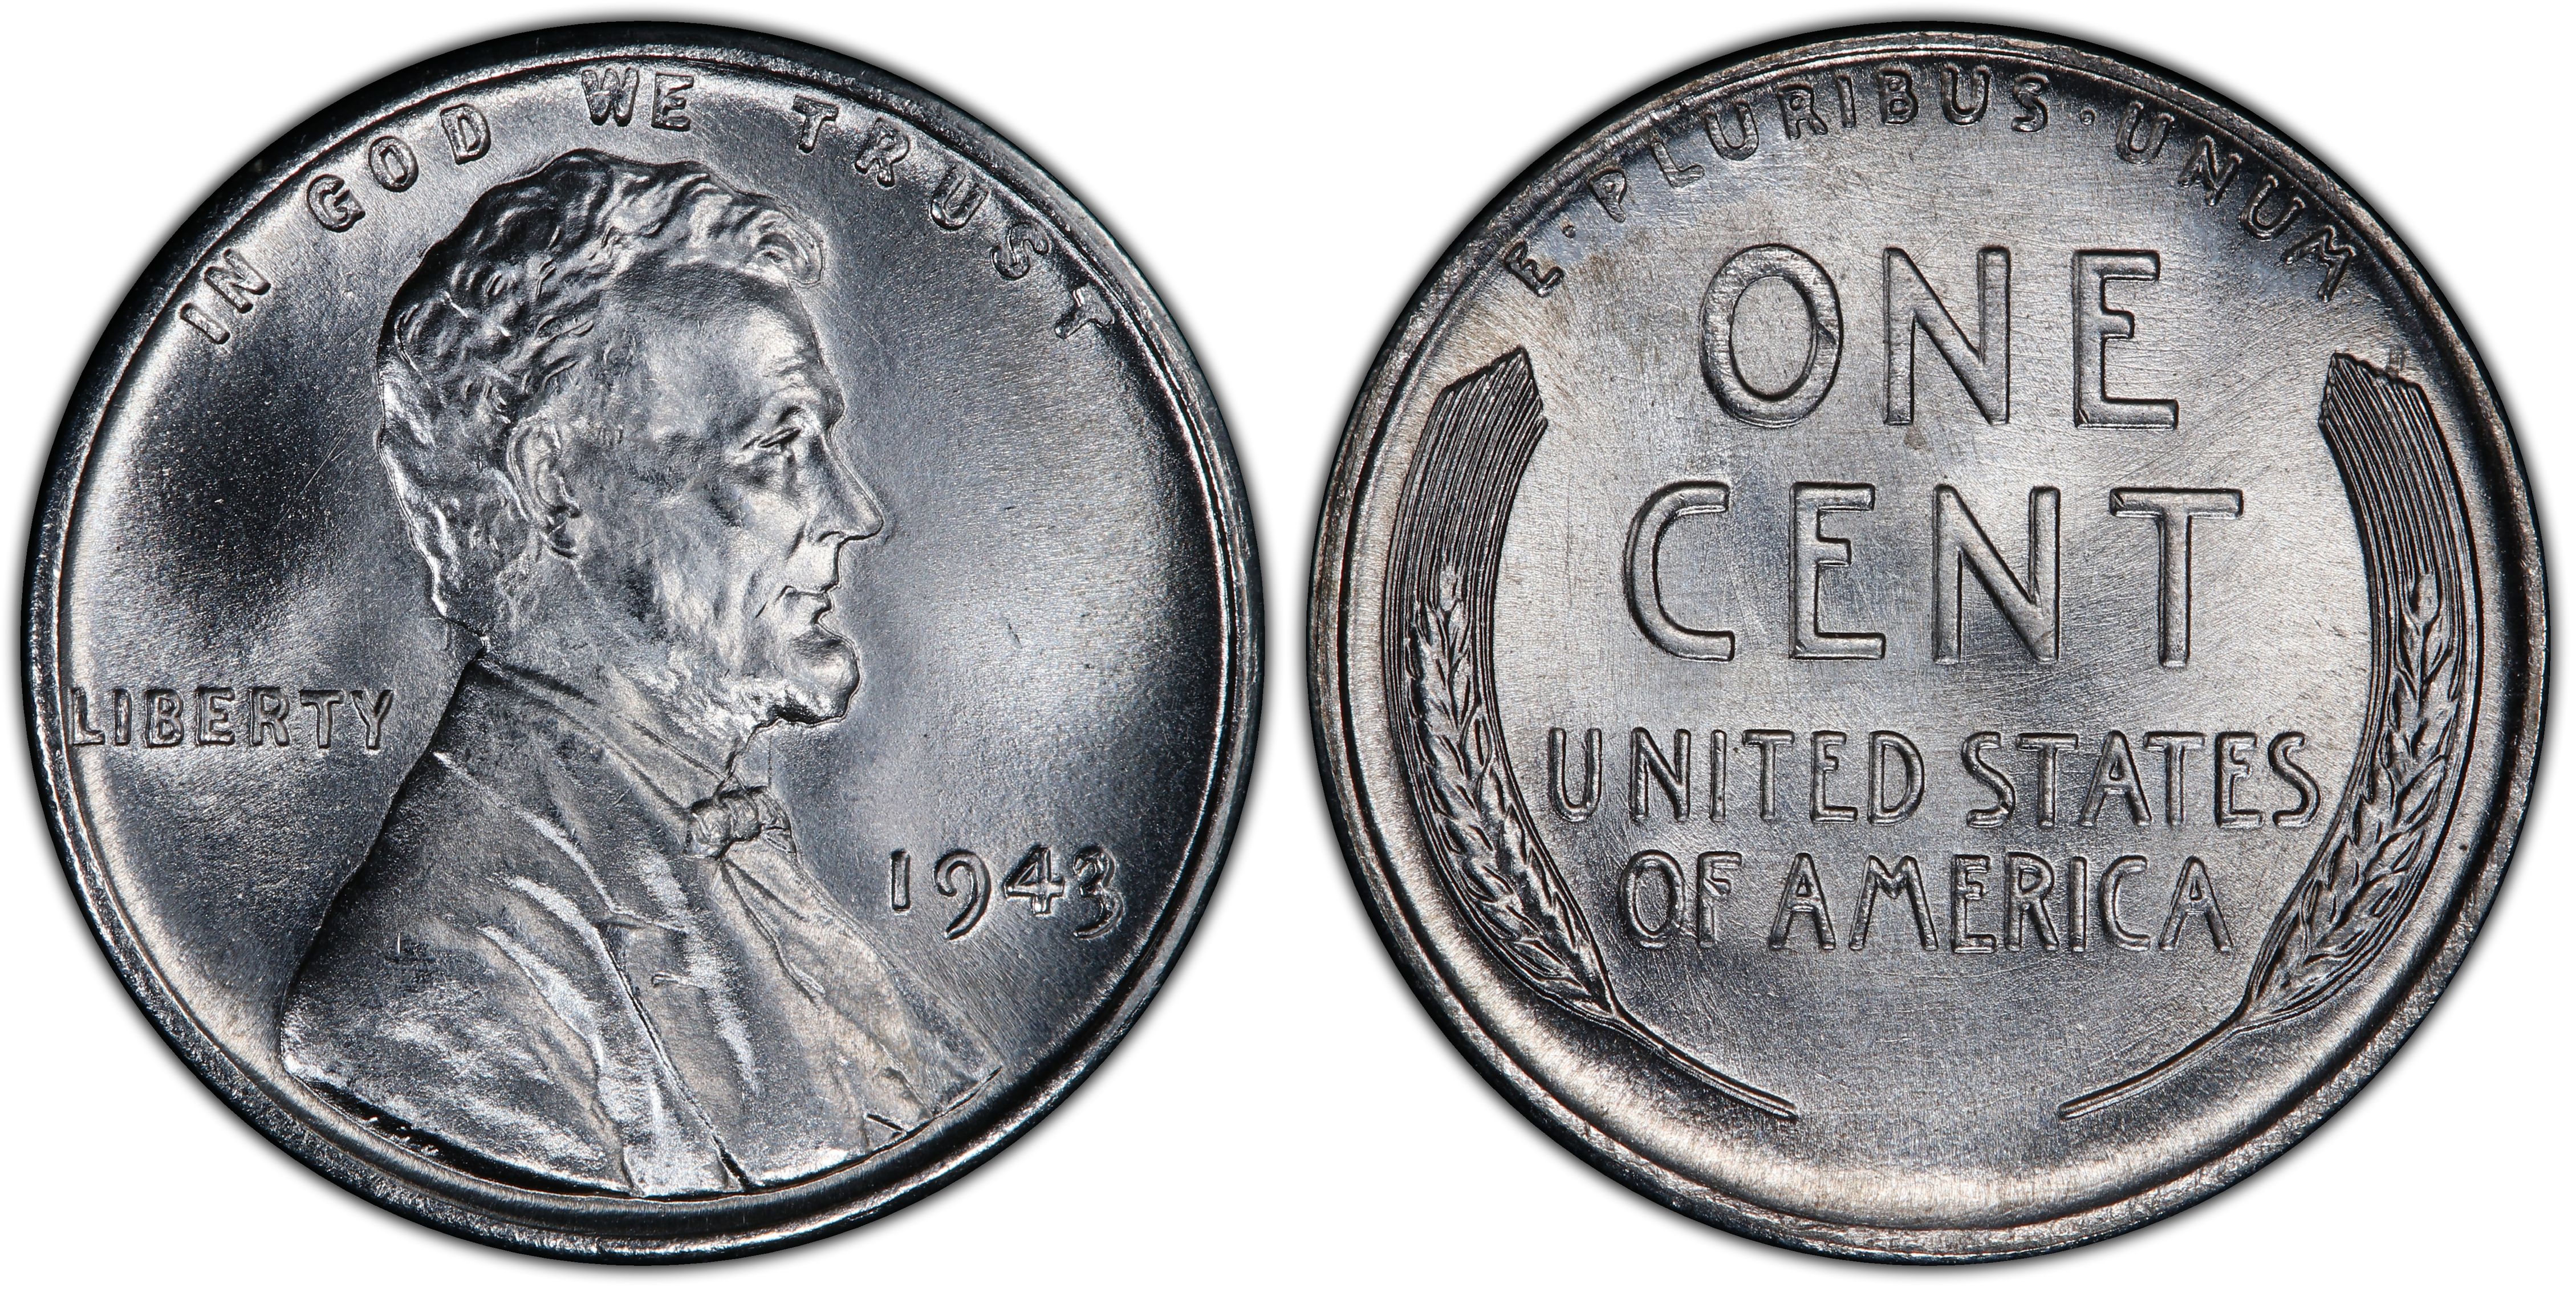 1943 Steel Lincoln Penny - Courtesy of Professional Coin Grading Services